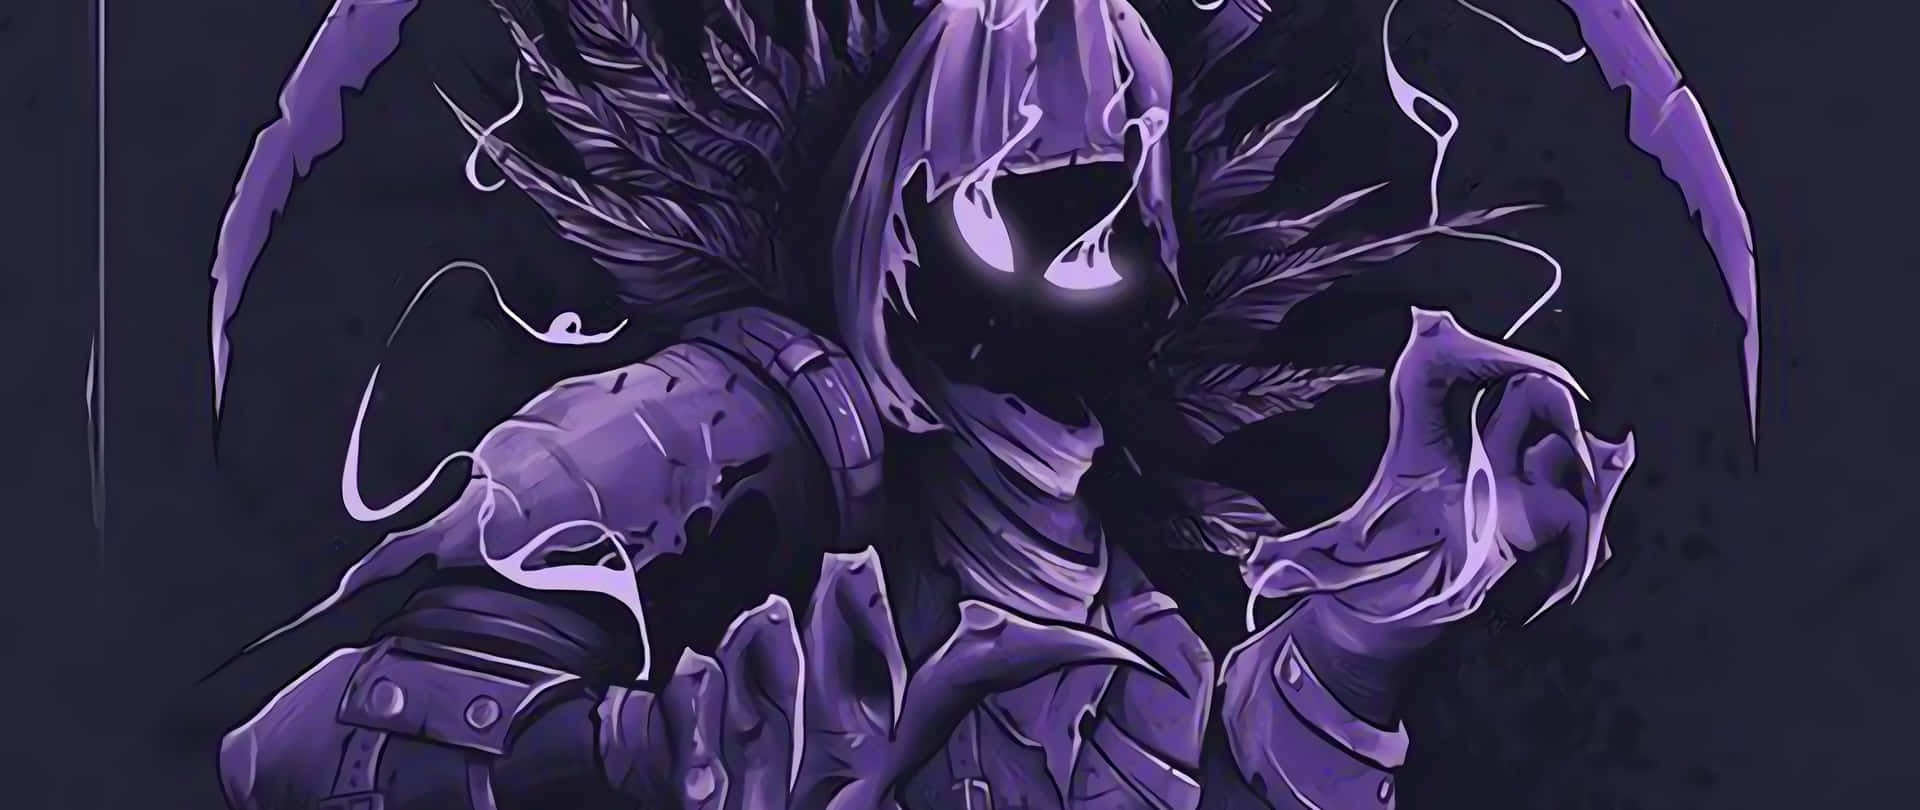 Be bold and edgy with Raven Fortnite Skin Wallpaper